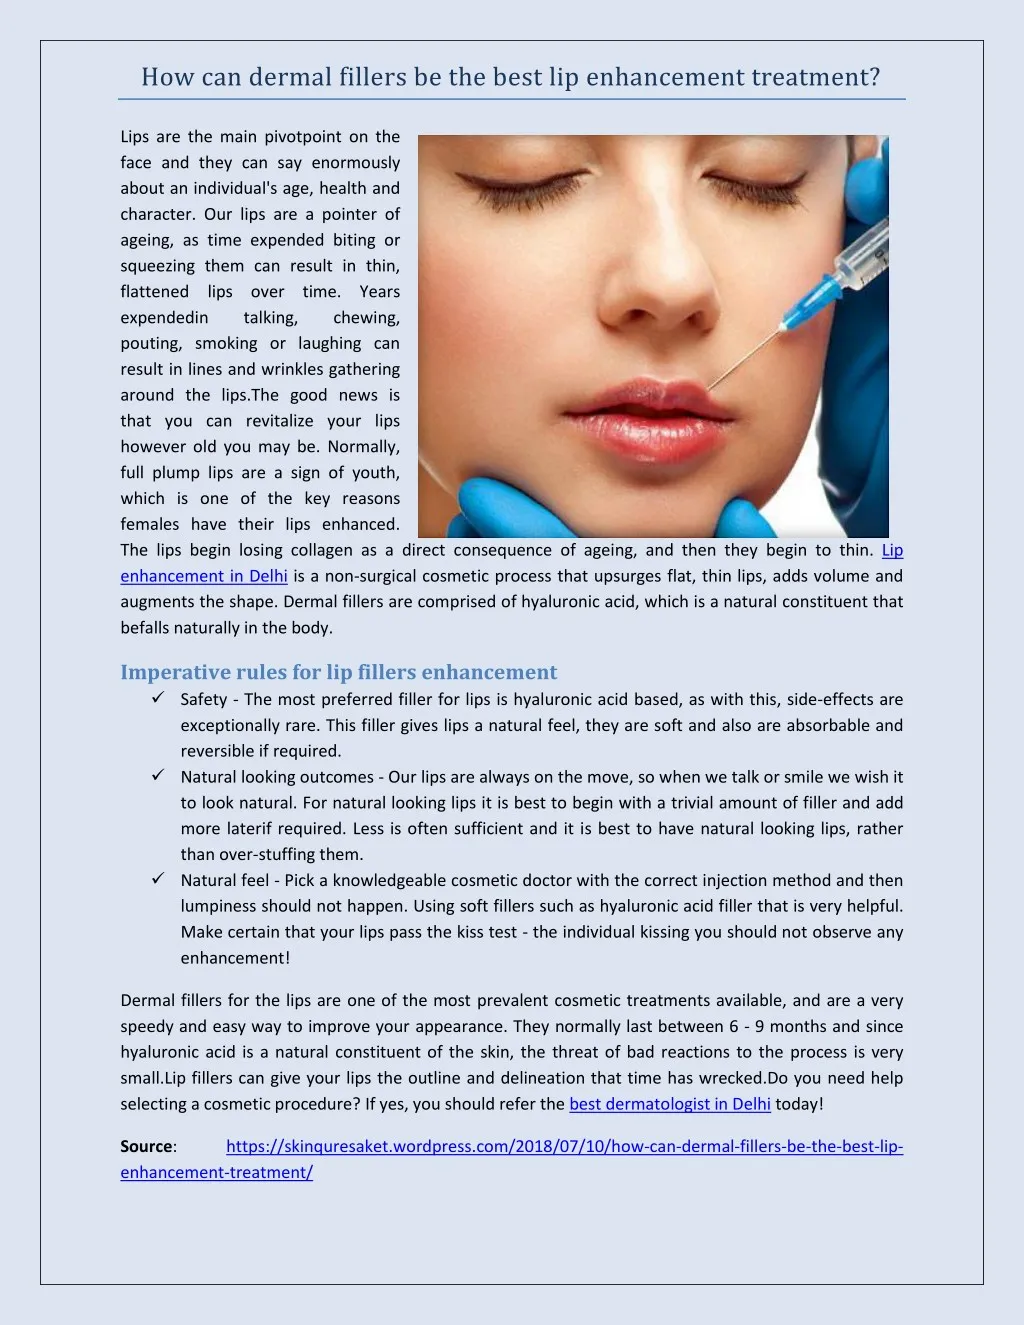 how can dermal fillers be the best